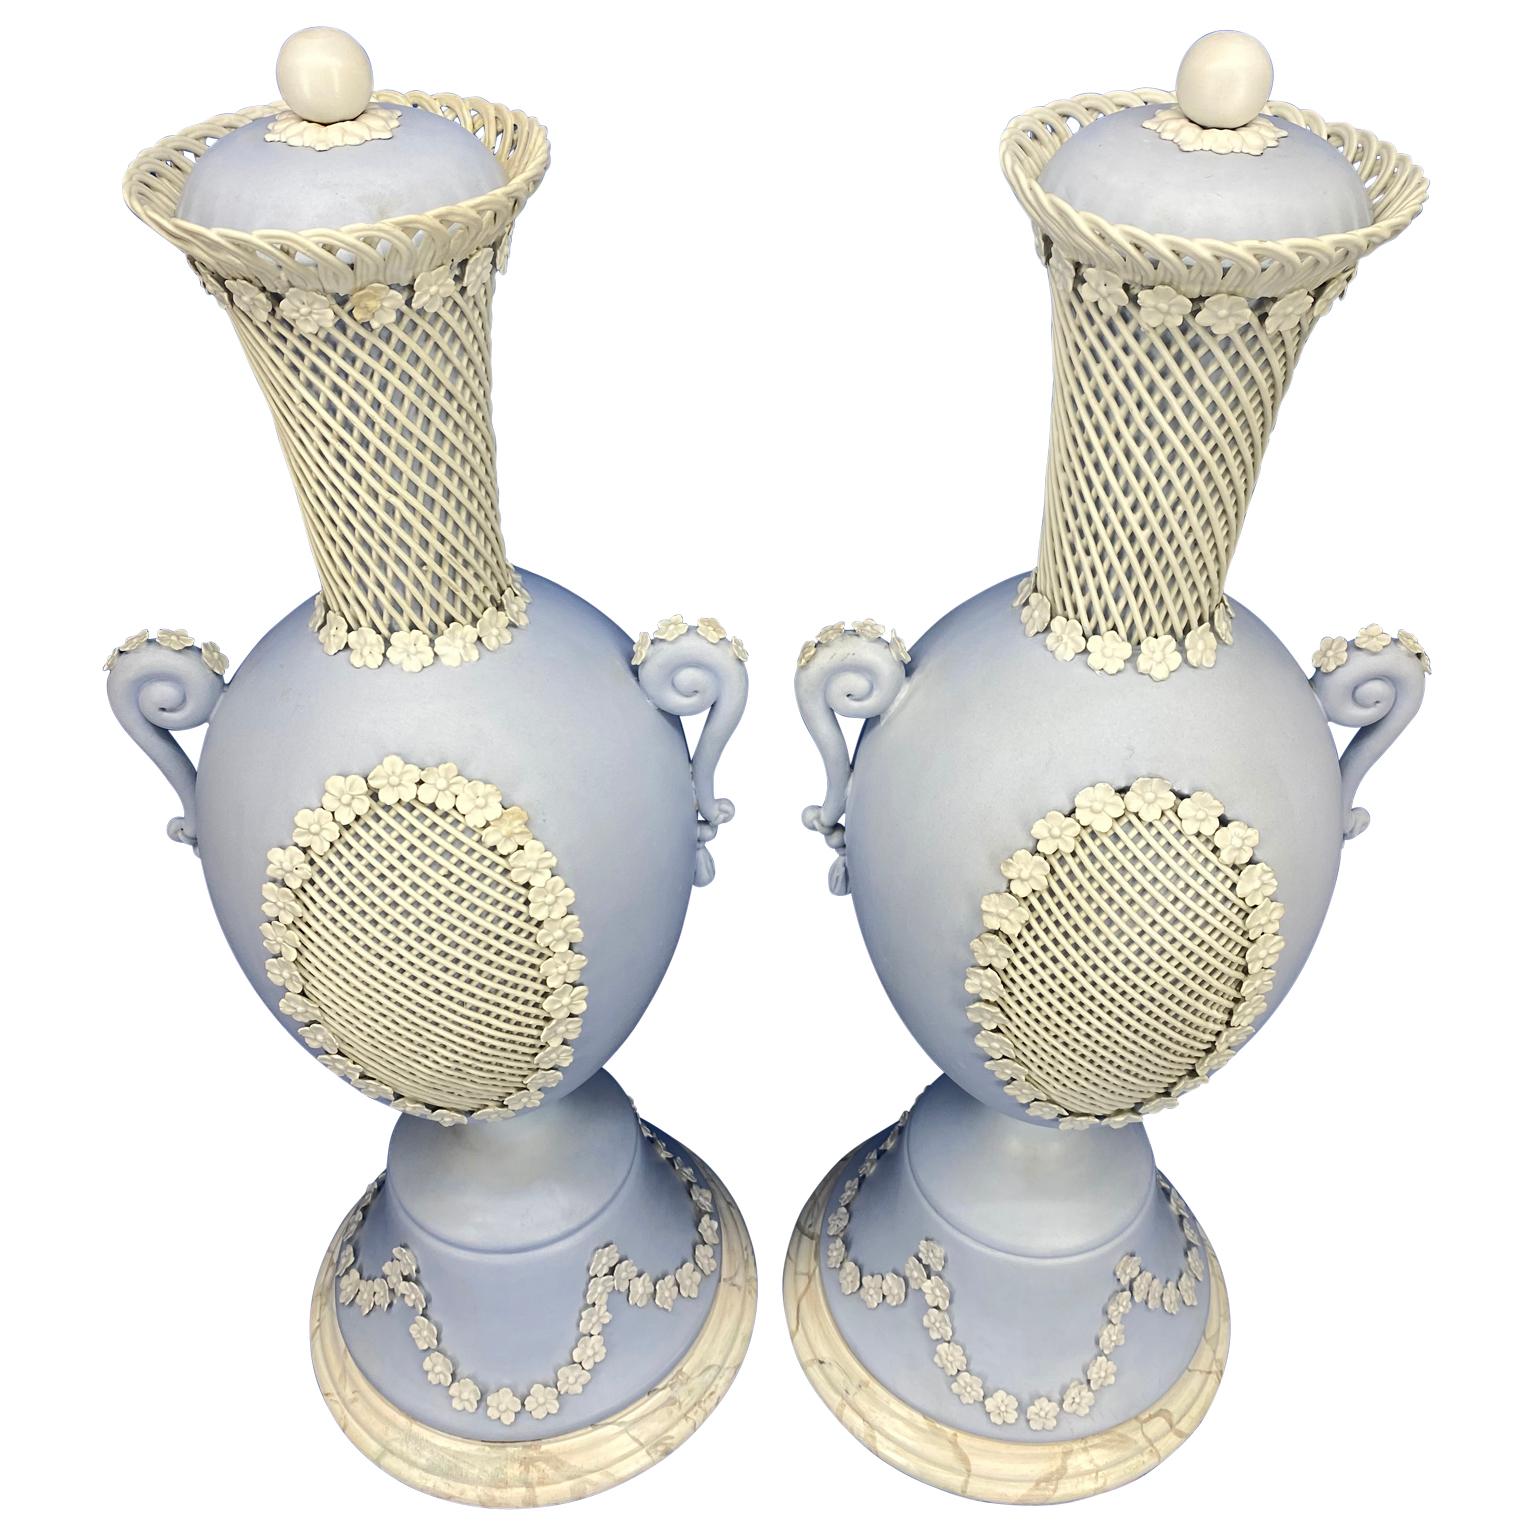 Ceramic Pair Of Light Blue Jasper Wedgwood Urns and Covers, England, Late 19th Century